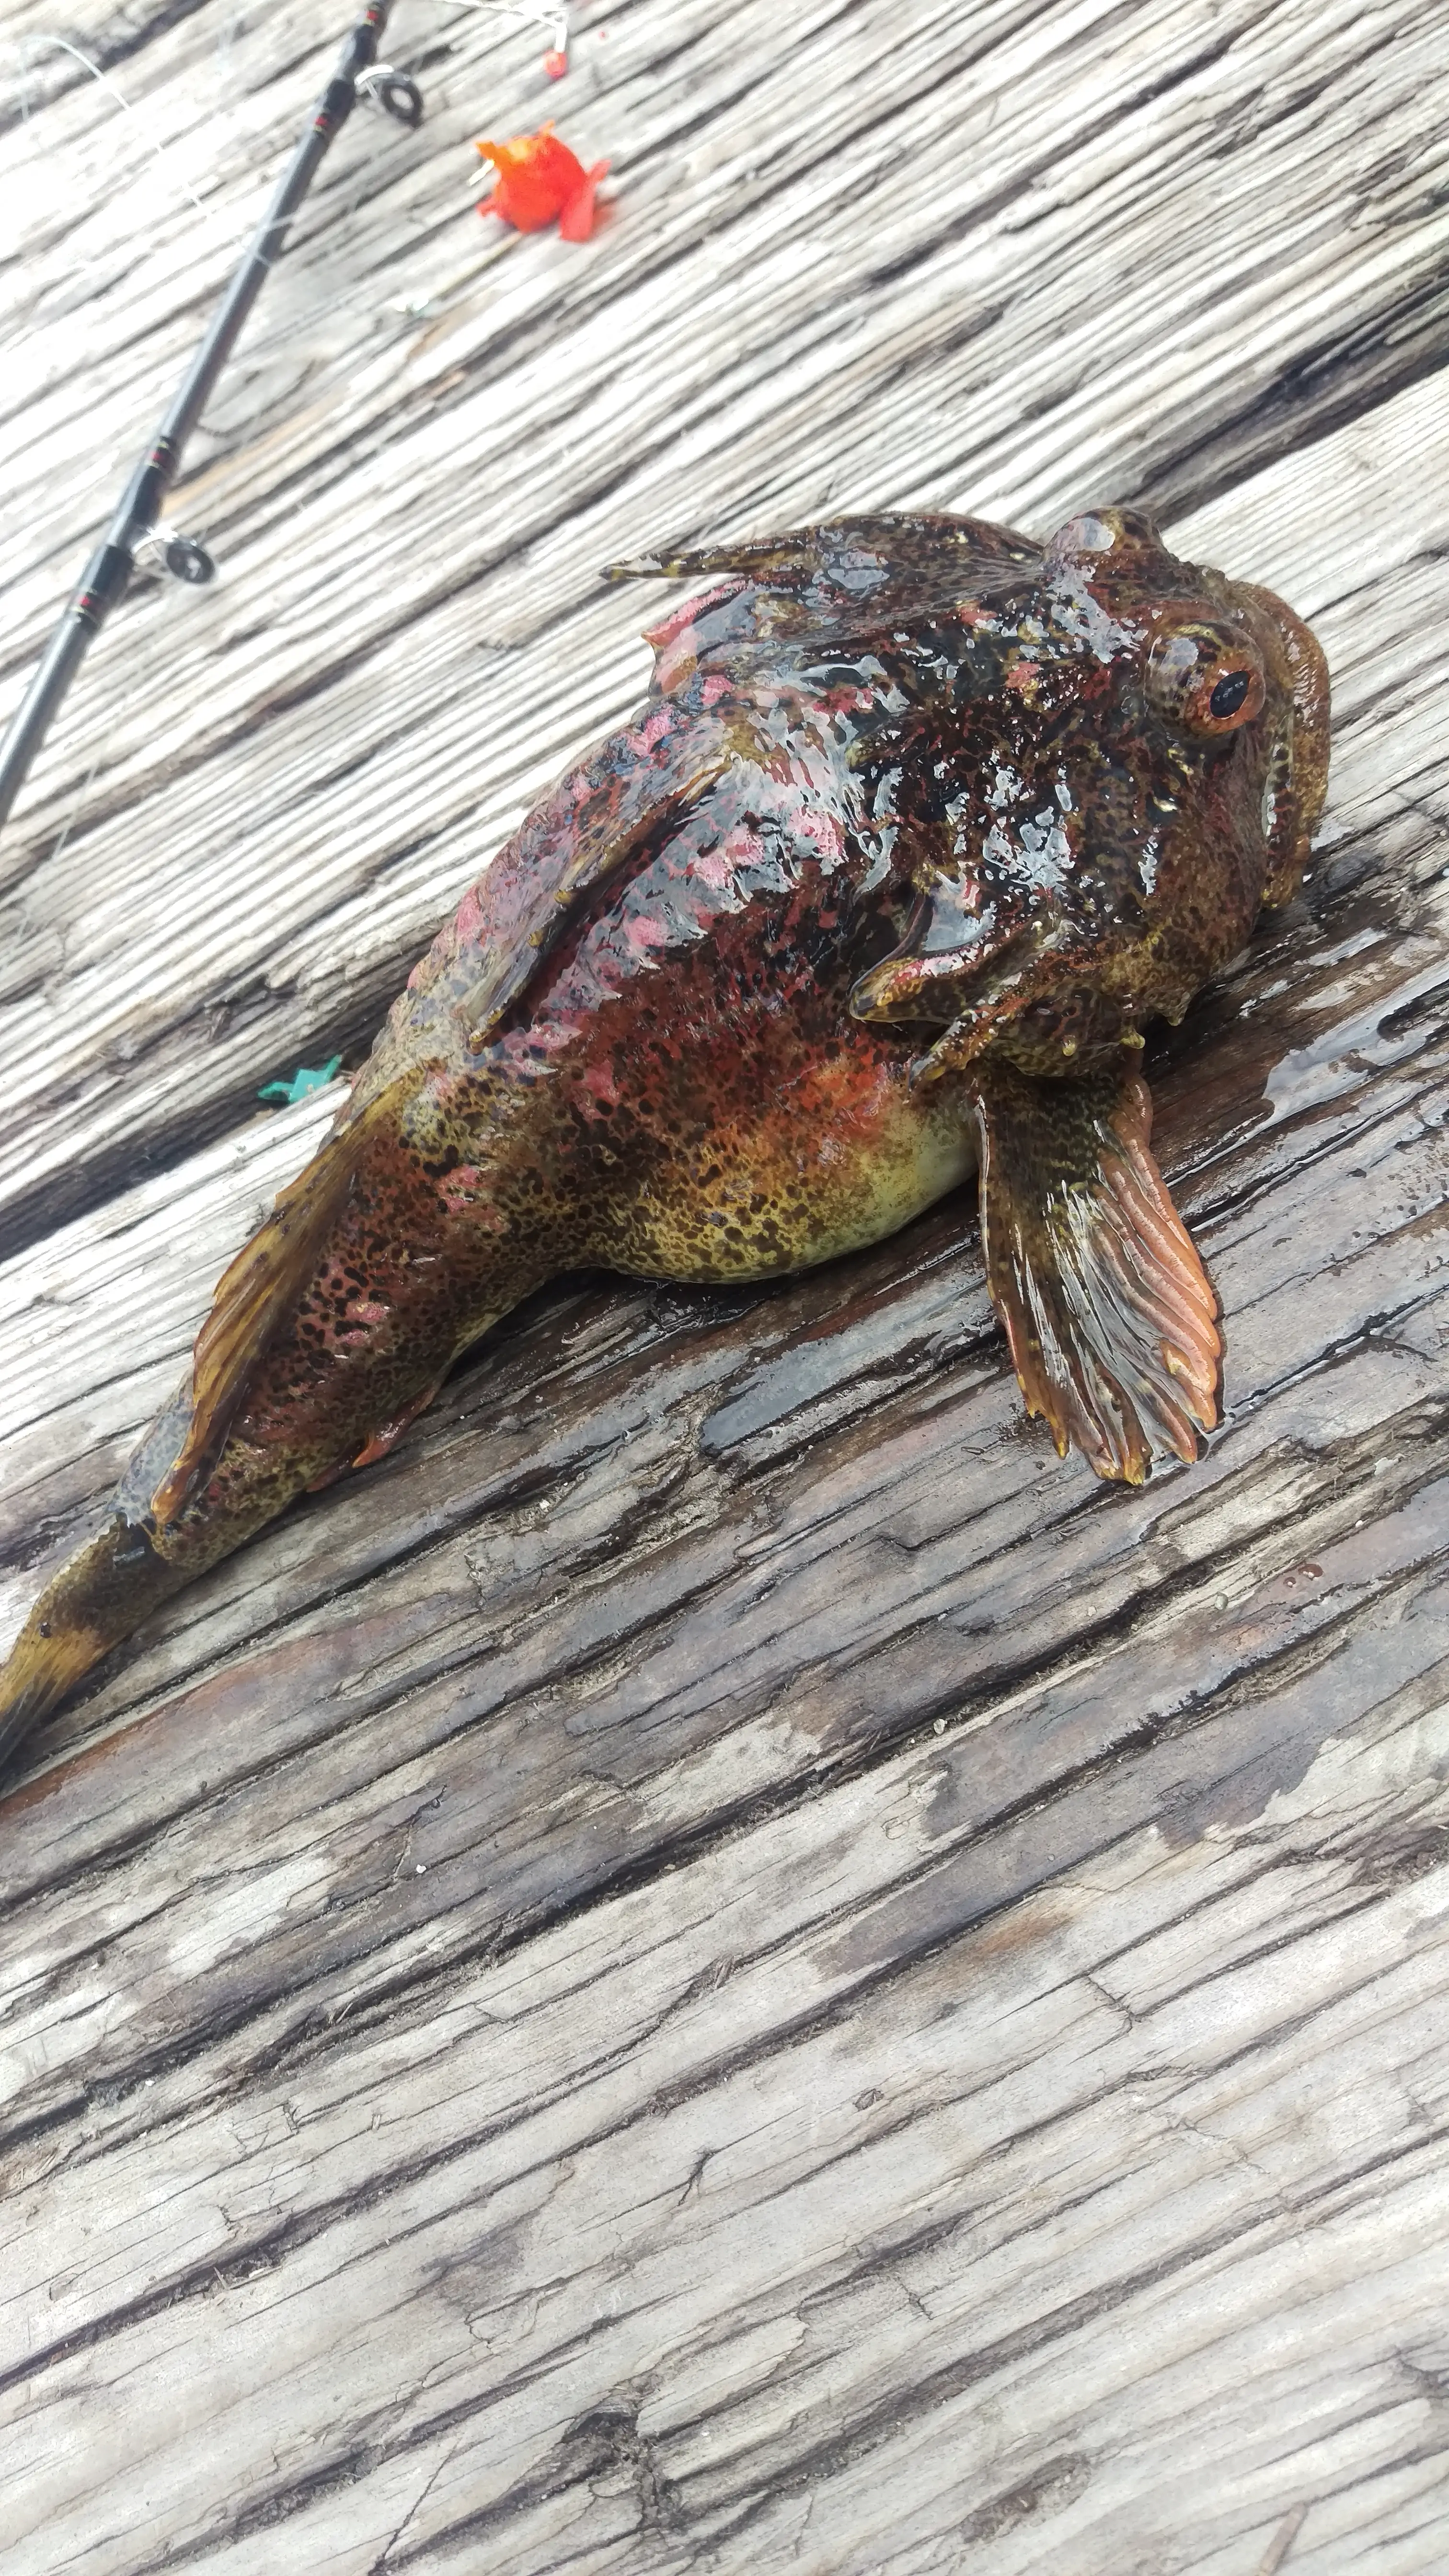 Guide to Puget Sound Bottom Critters - NWFR